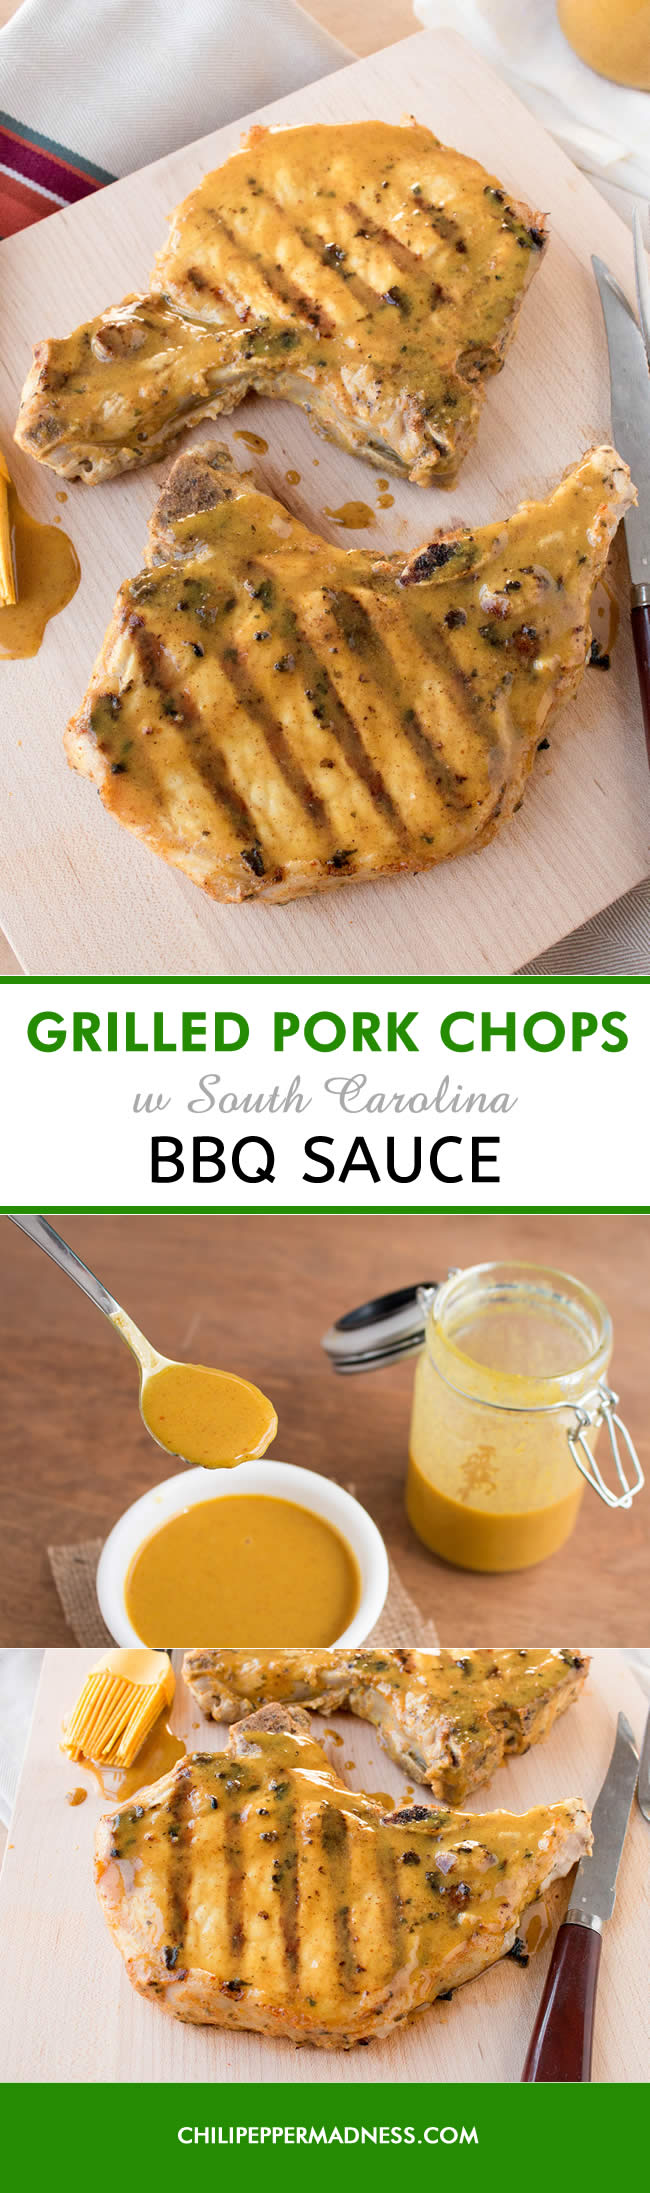 Grilled Pork Chops with South Carolina Barbecue Sauce - Recipe